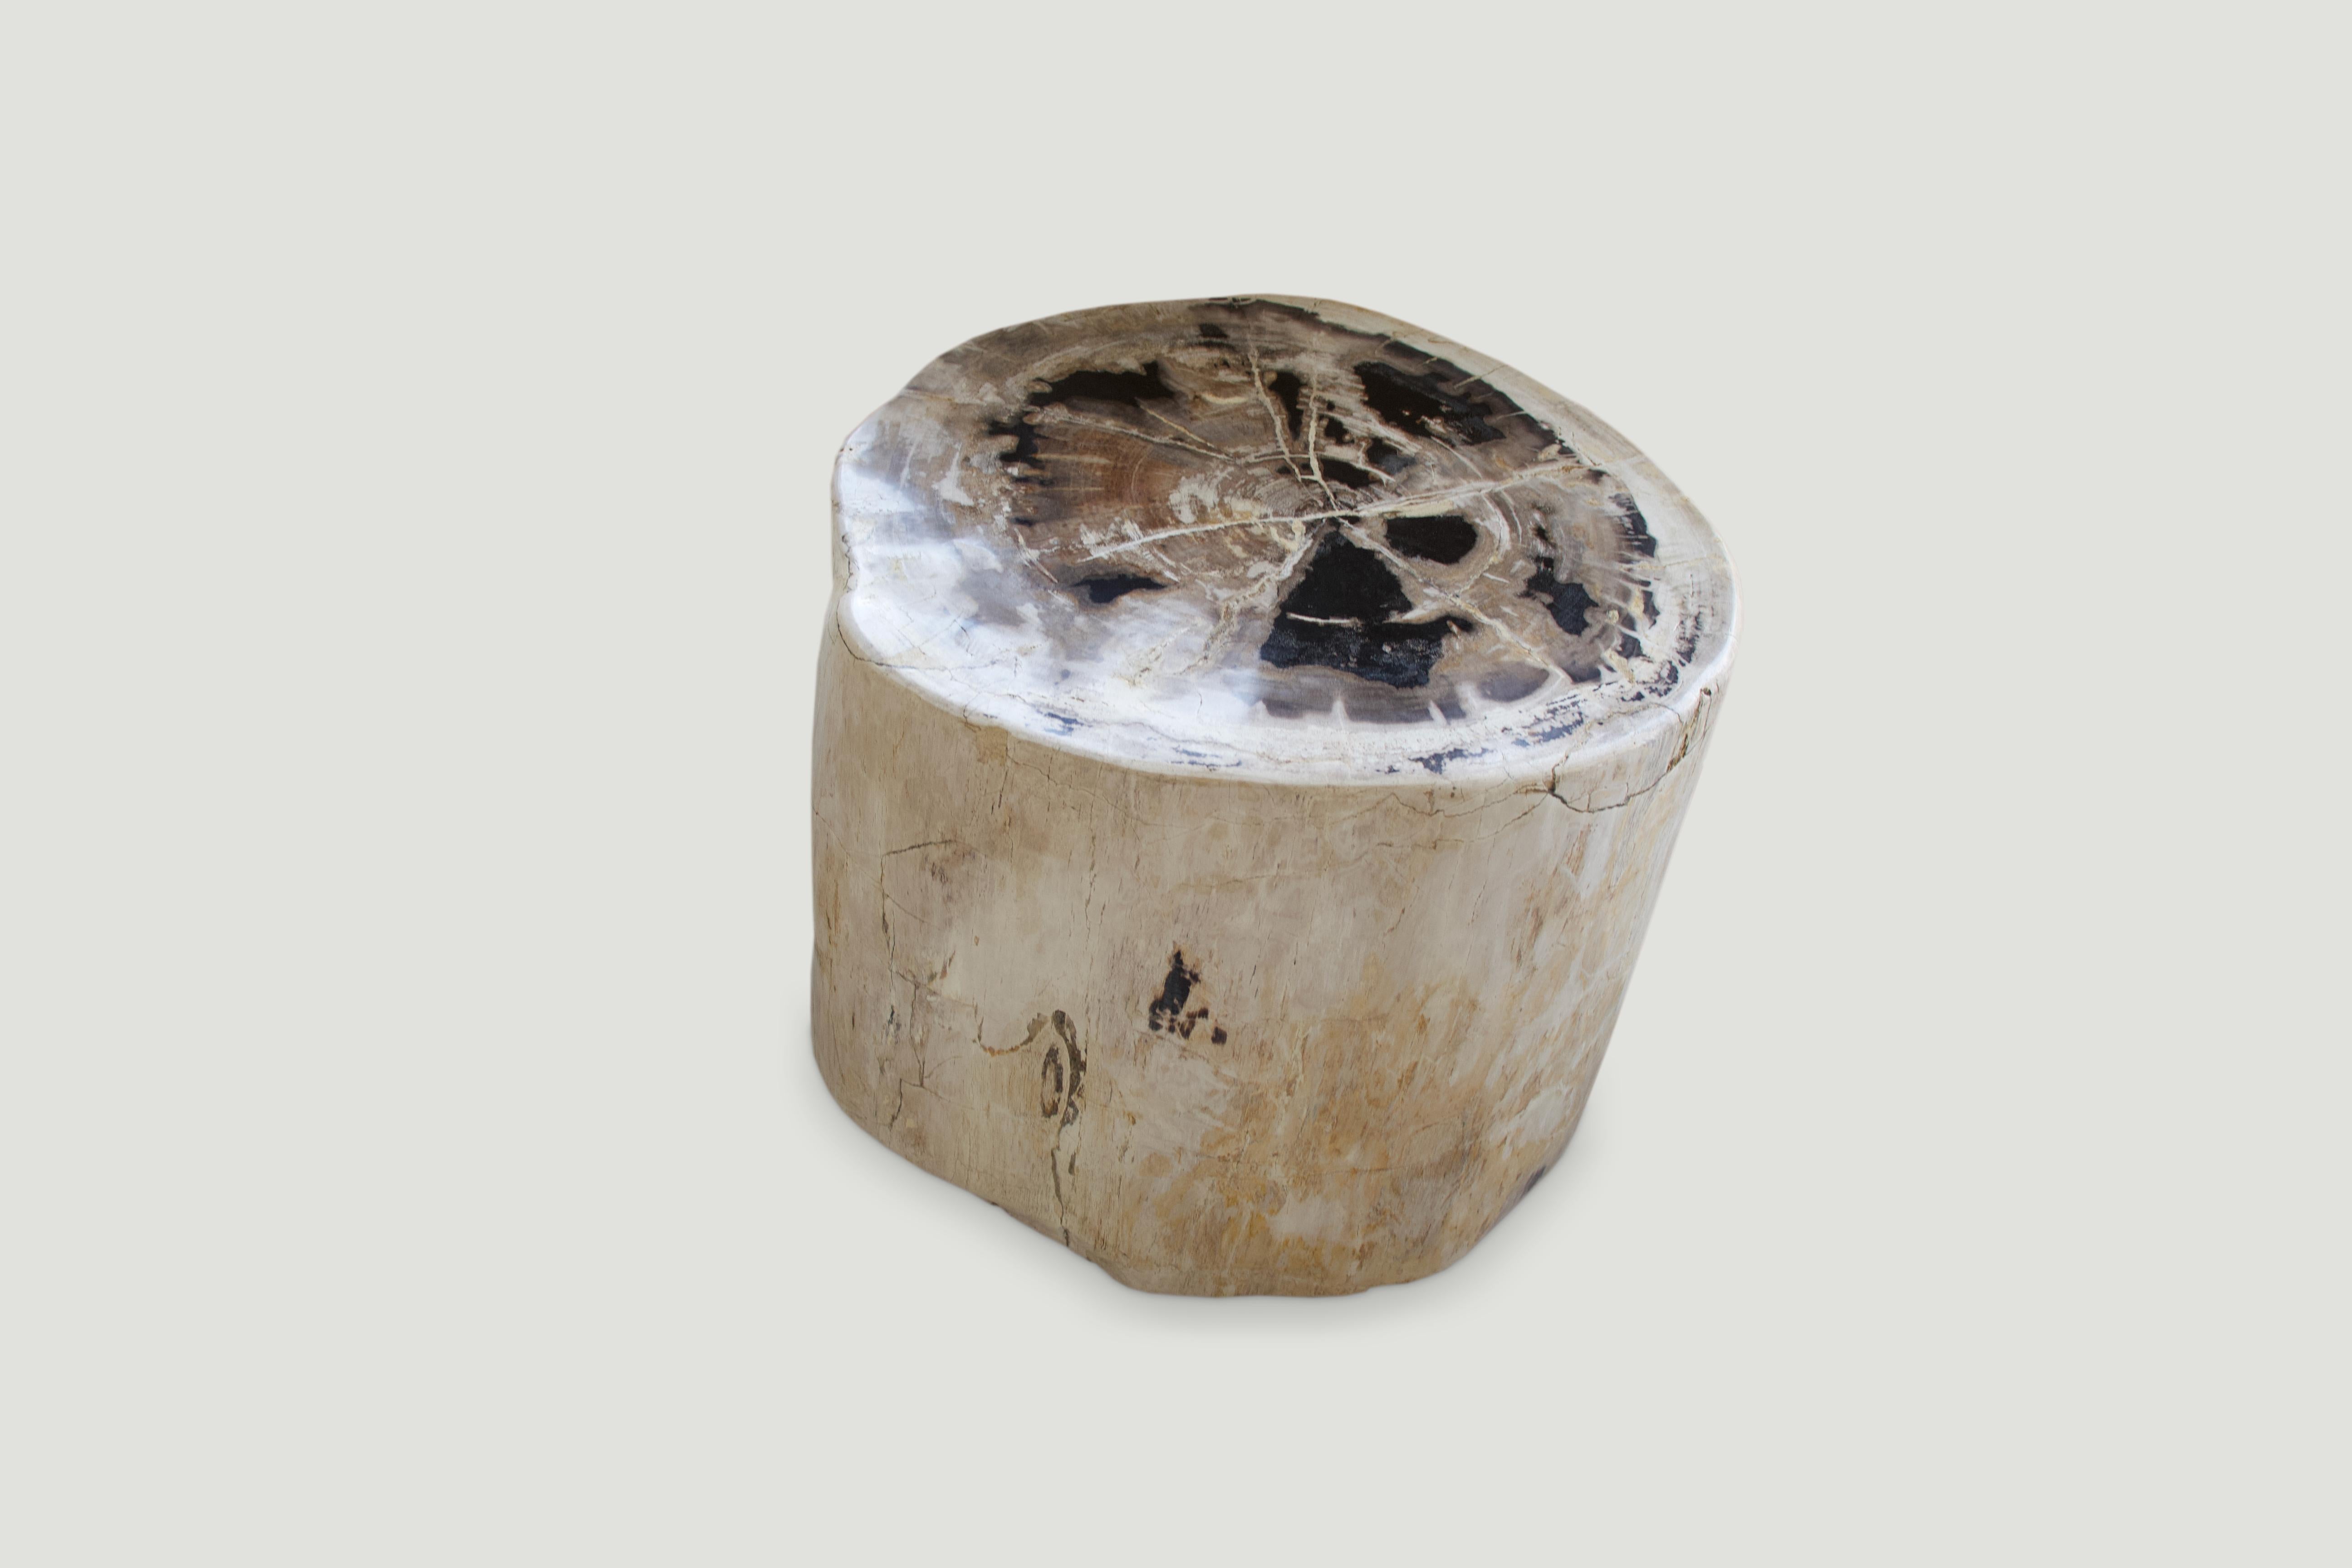 We have a pair of these beautiful side tables, cut from the same petrified wood log. The price reflects the one shown.

As with a diamond, we polish the highest quality fossilized petrified wood, using our latest ground breaking technology, to